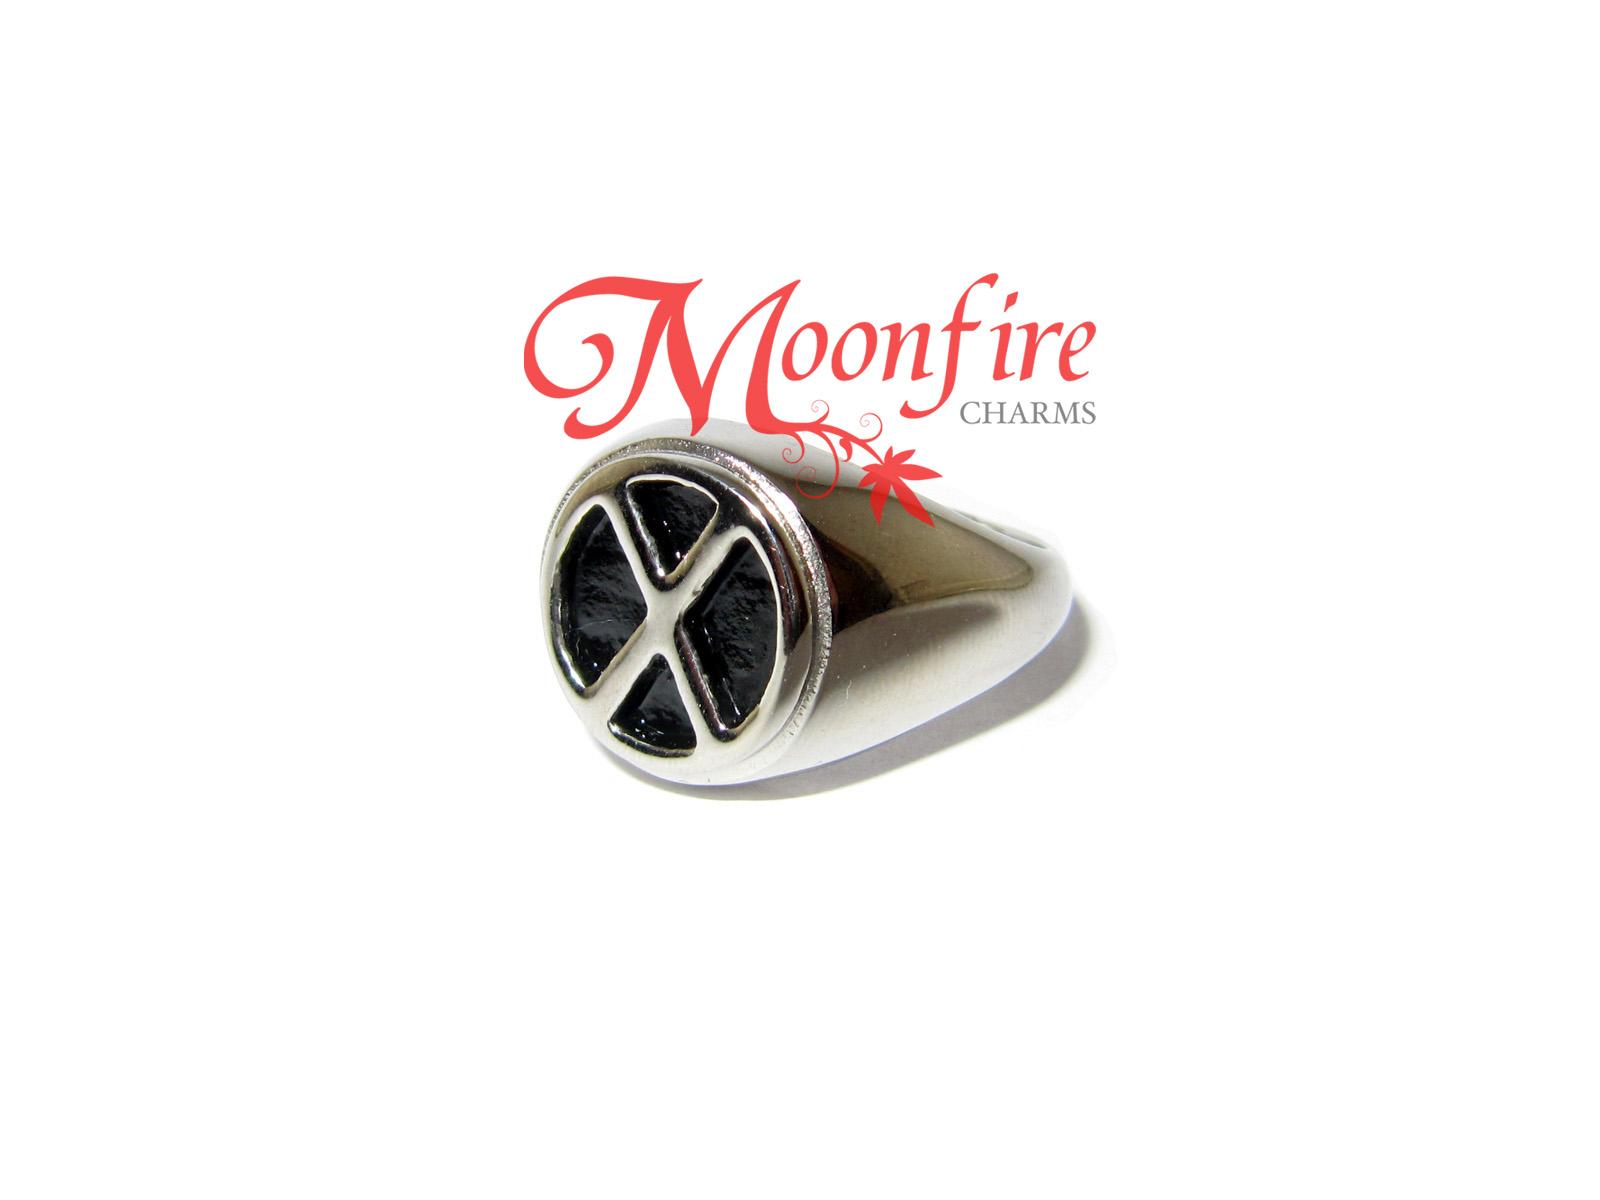 All the X-Men Superhero Logo - X Men: Charles Xavier School For Gifted Youngsters X Logo Ring